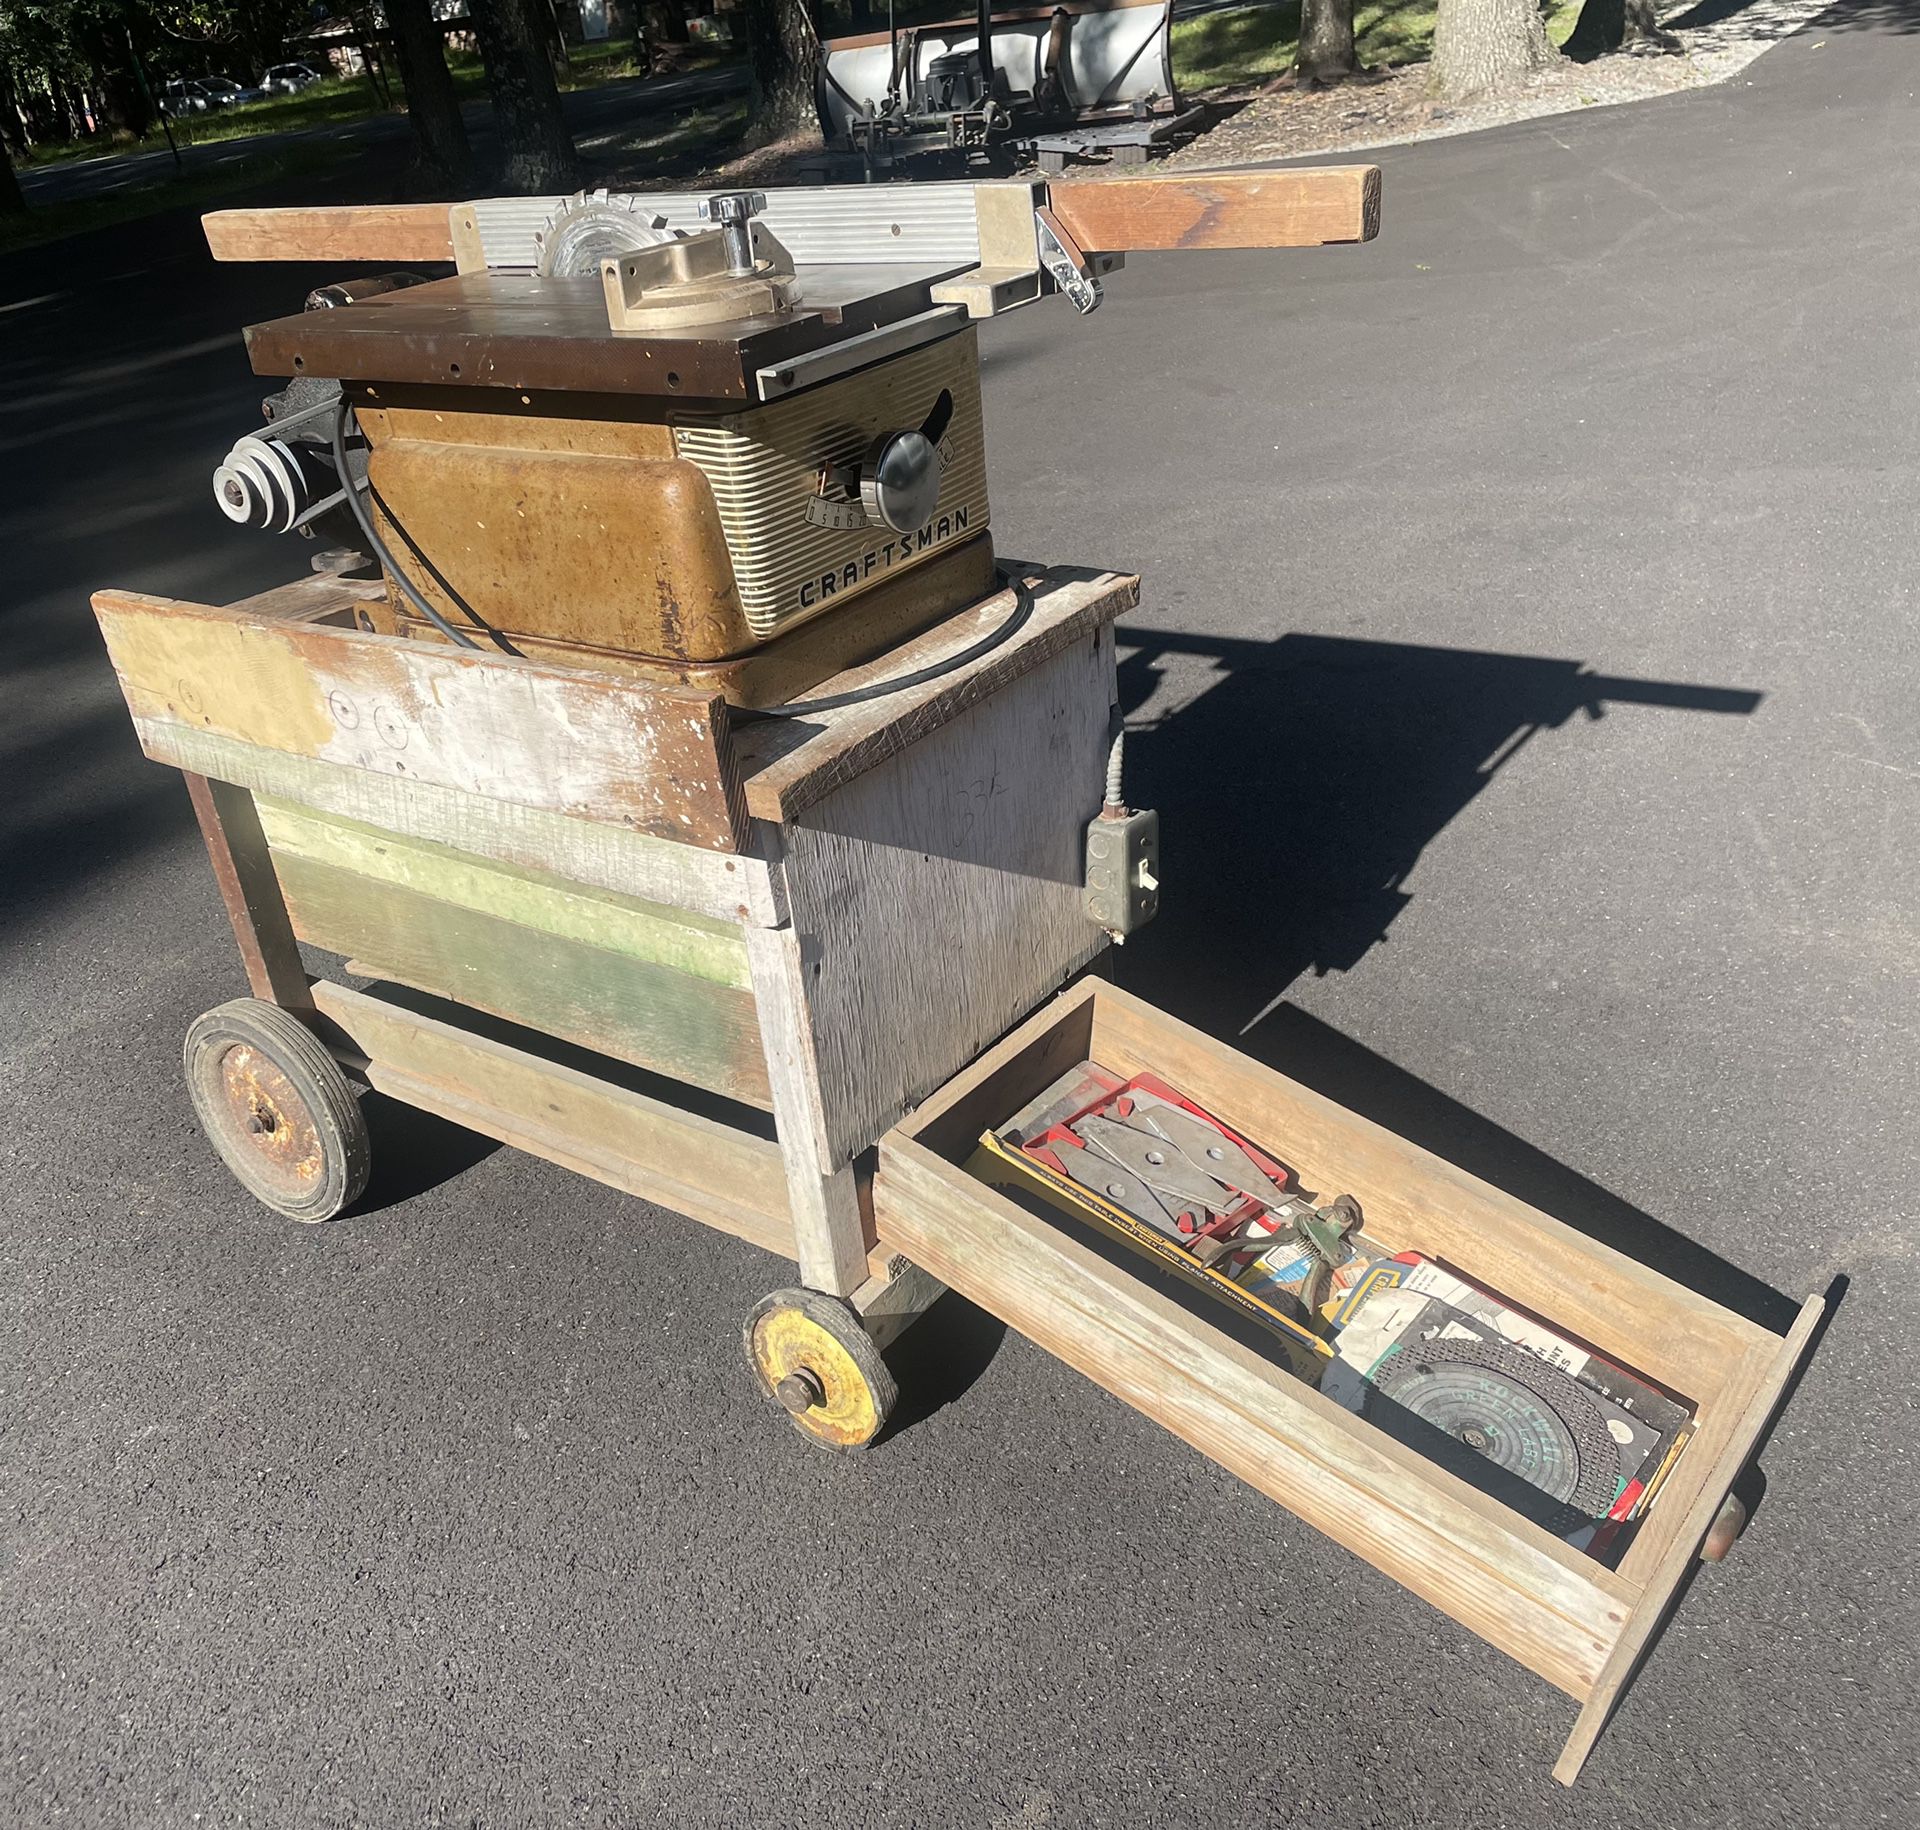 Old But Awesome Craftsman Table saw 